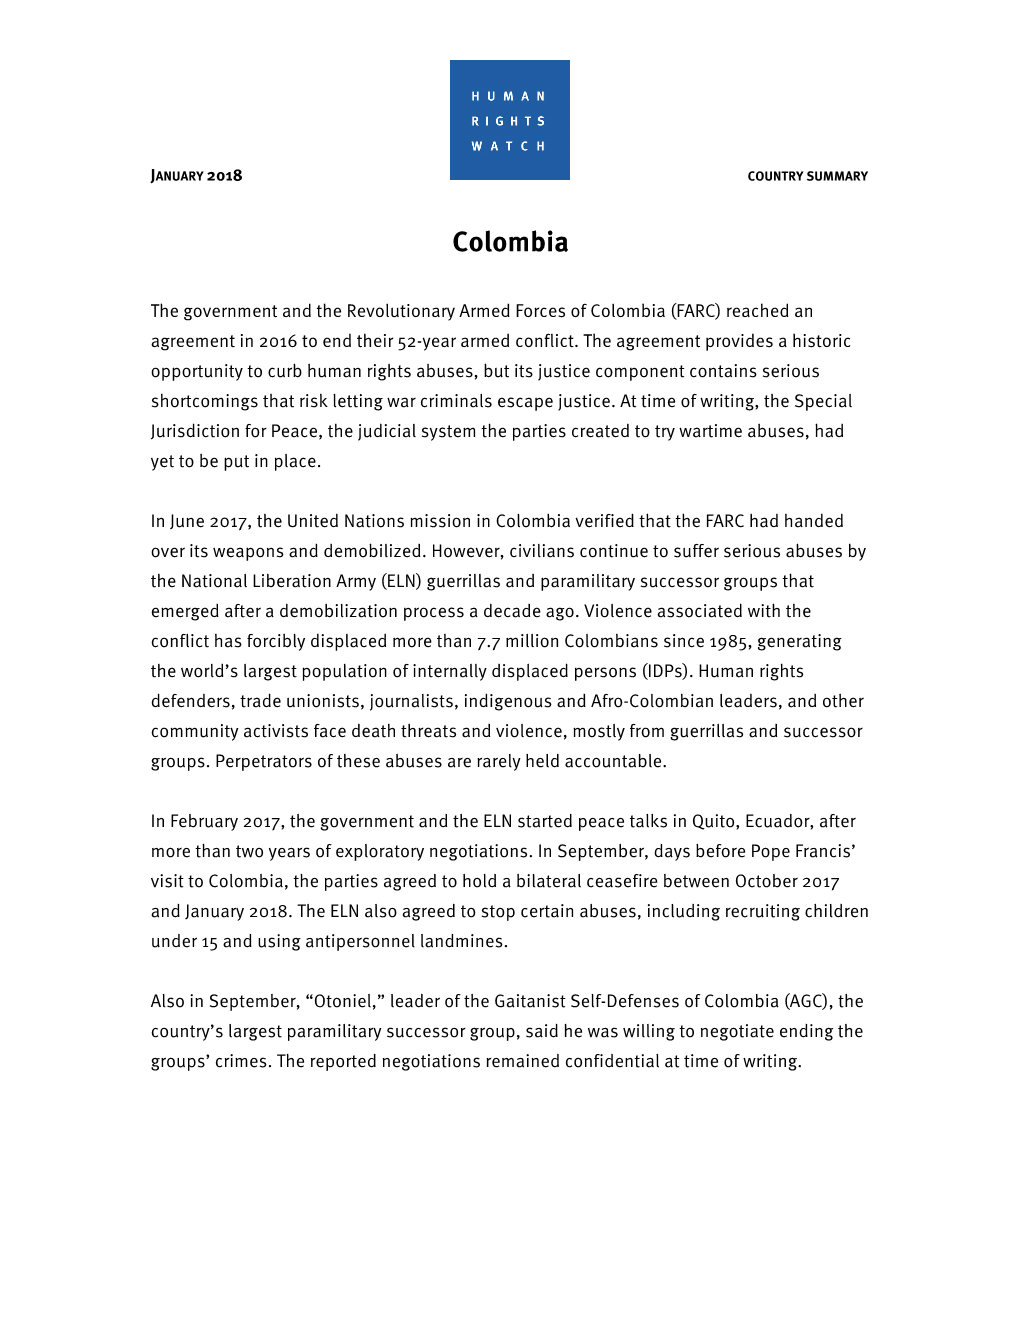 HRW Colombia Report 2018